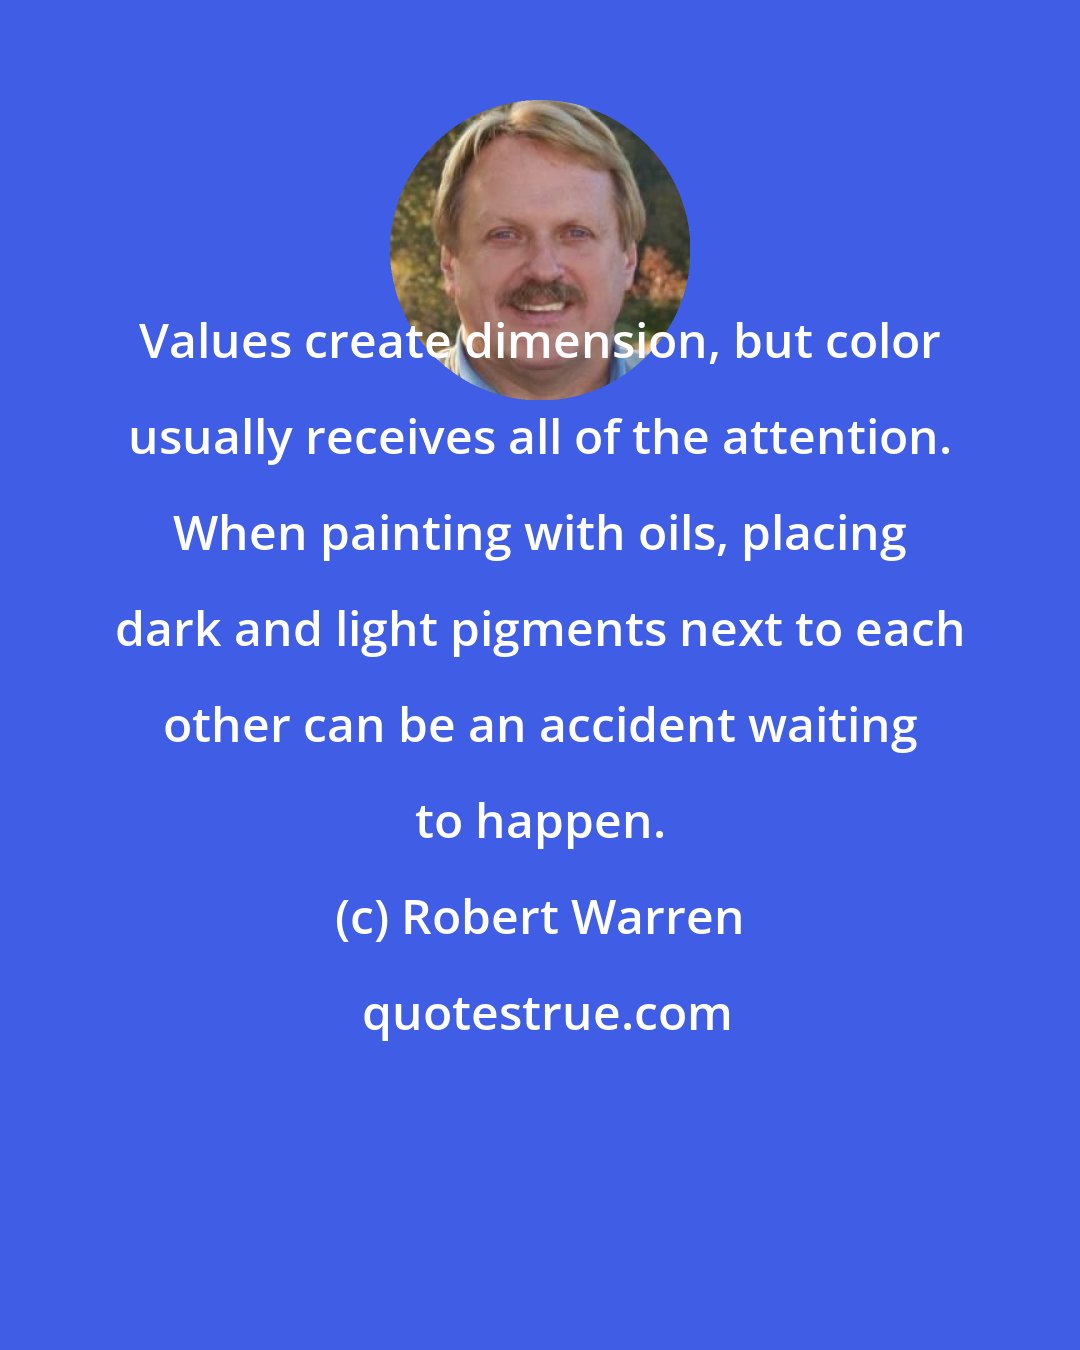 Robert Warren: Values create dimension, but color usually receives all of the attention. When painting with oils, placing dark and light pigments next to each other can be an accident waiting to happen.